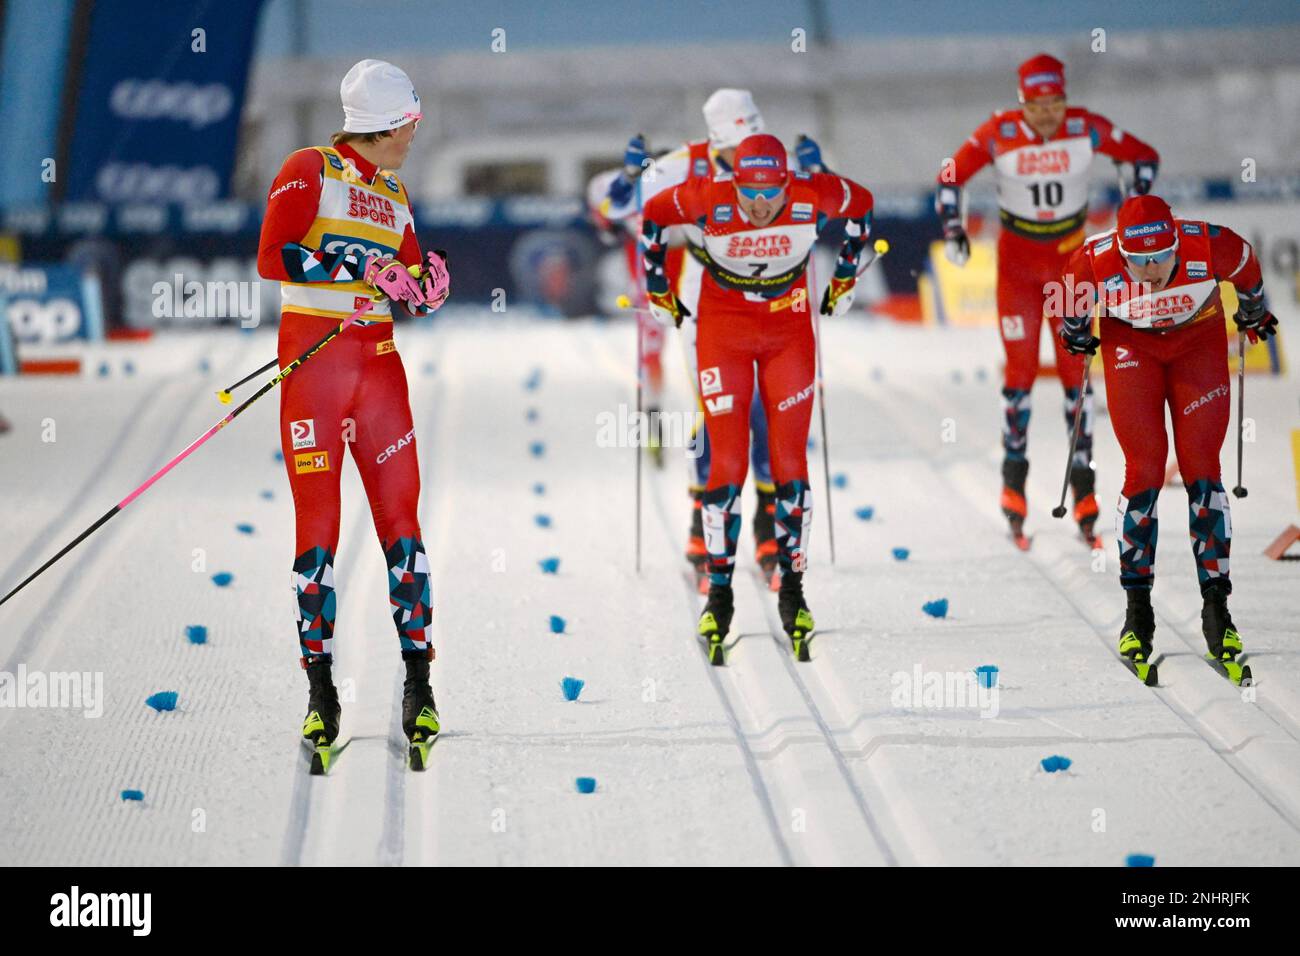 Norway's Johannes Hoesflot Klaebo, left, looks back as he competes during a  heat of the men's cross-country skiing classic style sprint finals, at the  Cross-Country Skiing World Cup Ruka Nordic Opening event